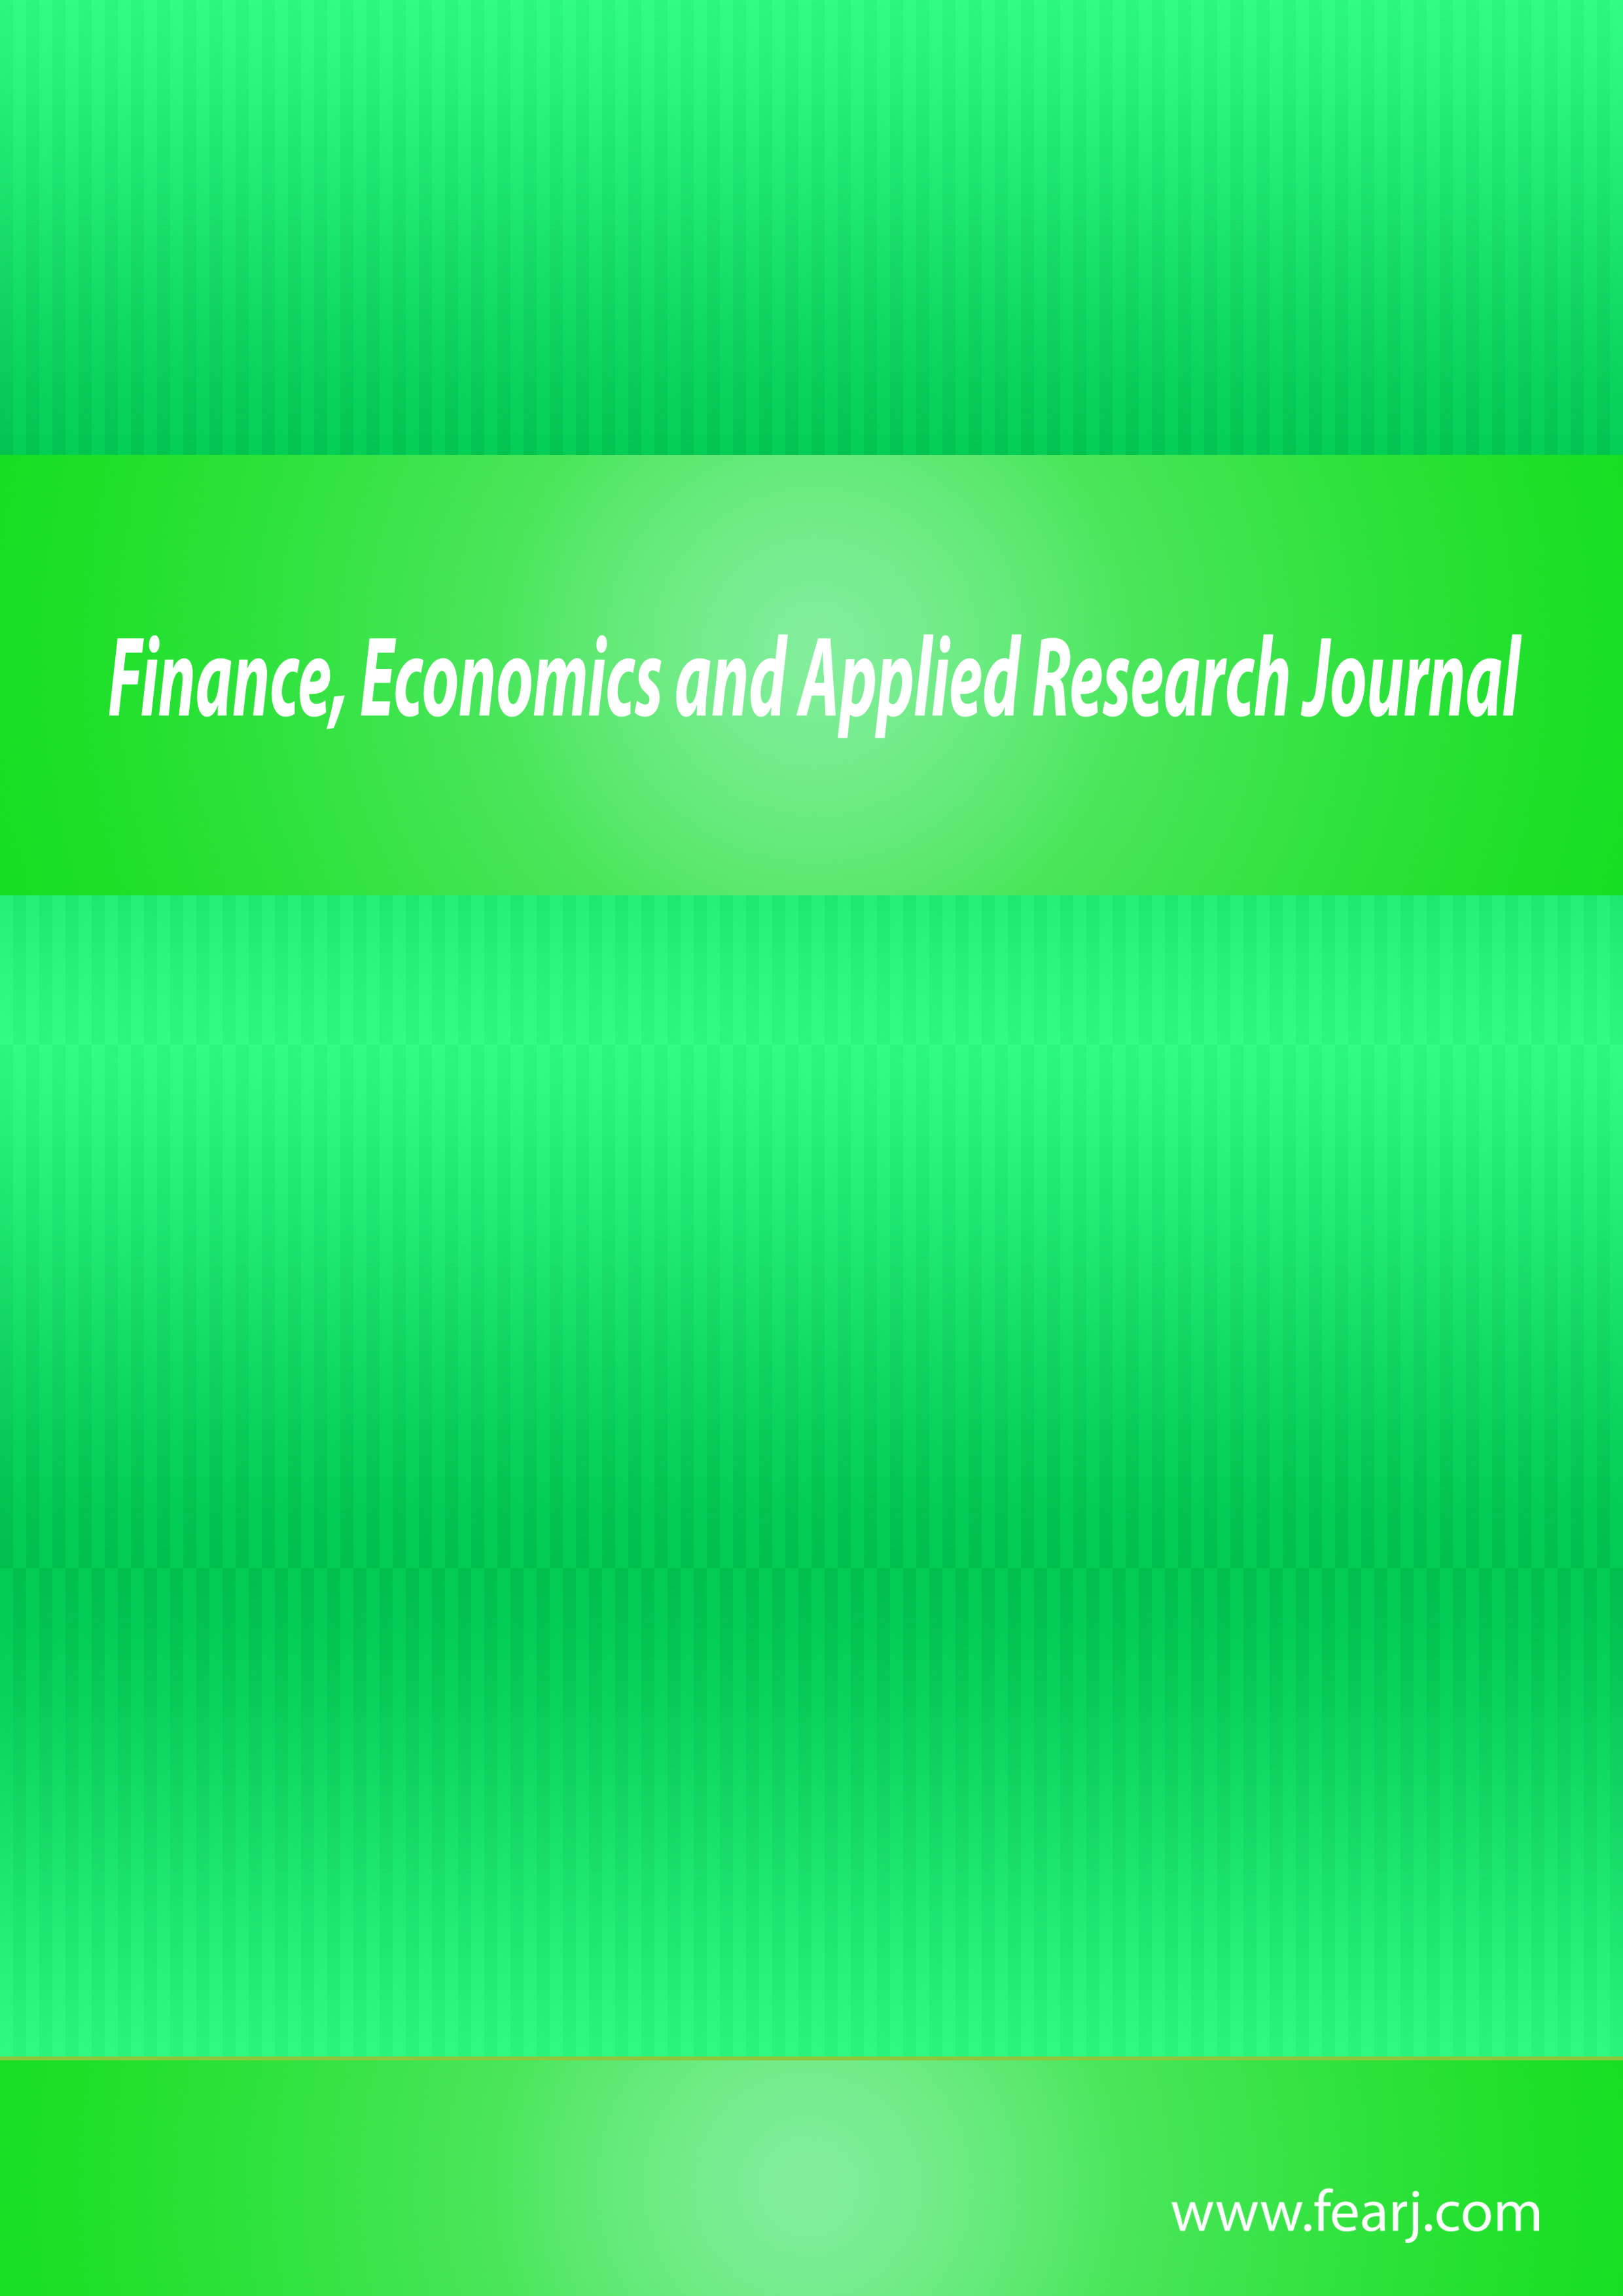 Finance Economics and Applied Research Journal